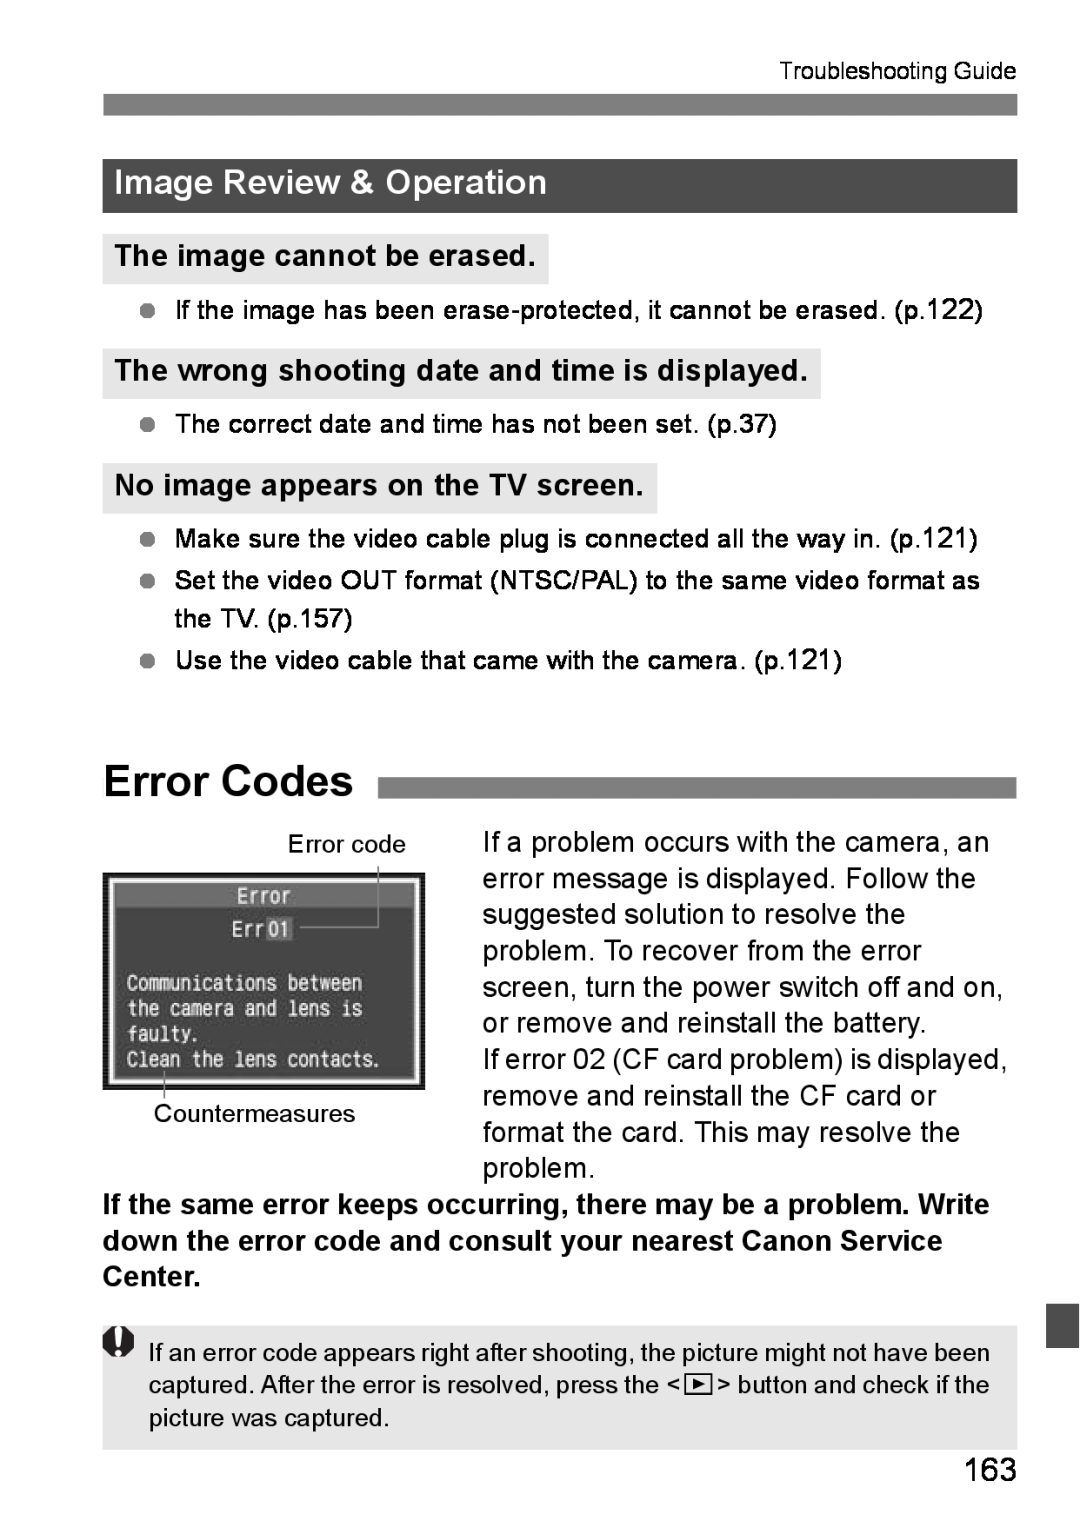 Canon EOS DIGITAL REBEL XTI instruction manual Error Codes, Image Review & Operation, The image cannot be erased 